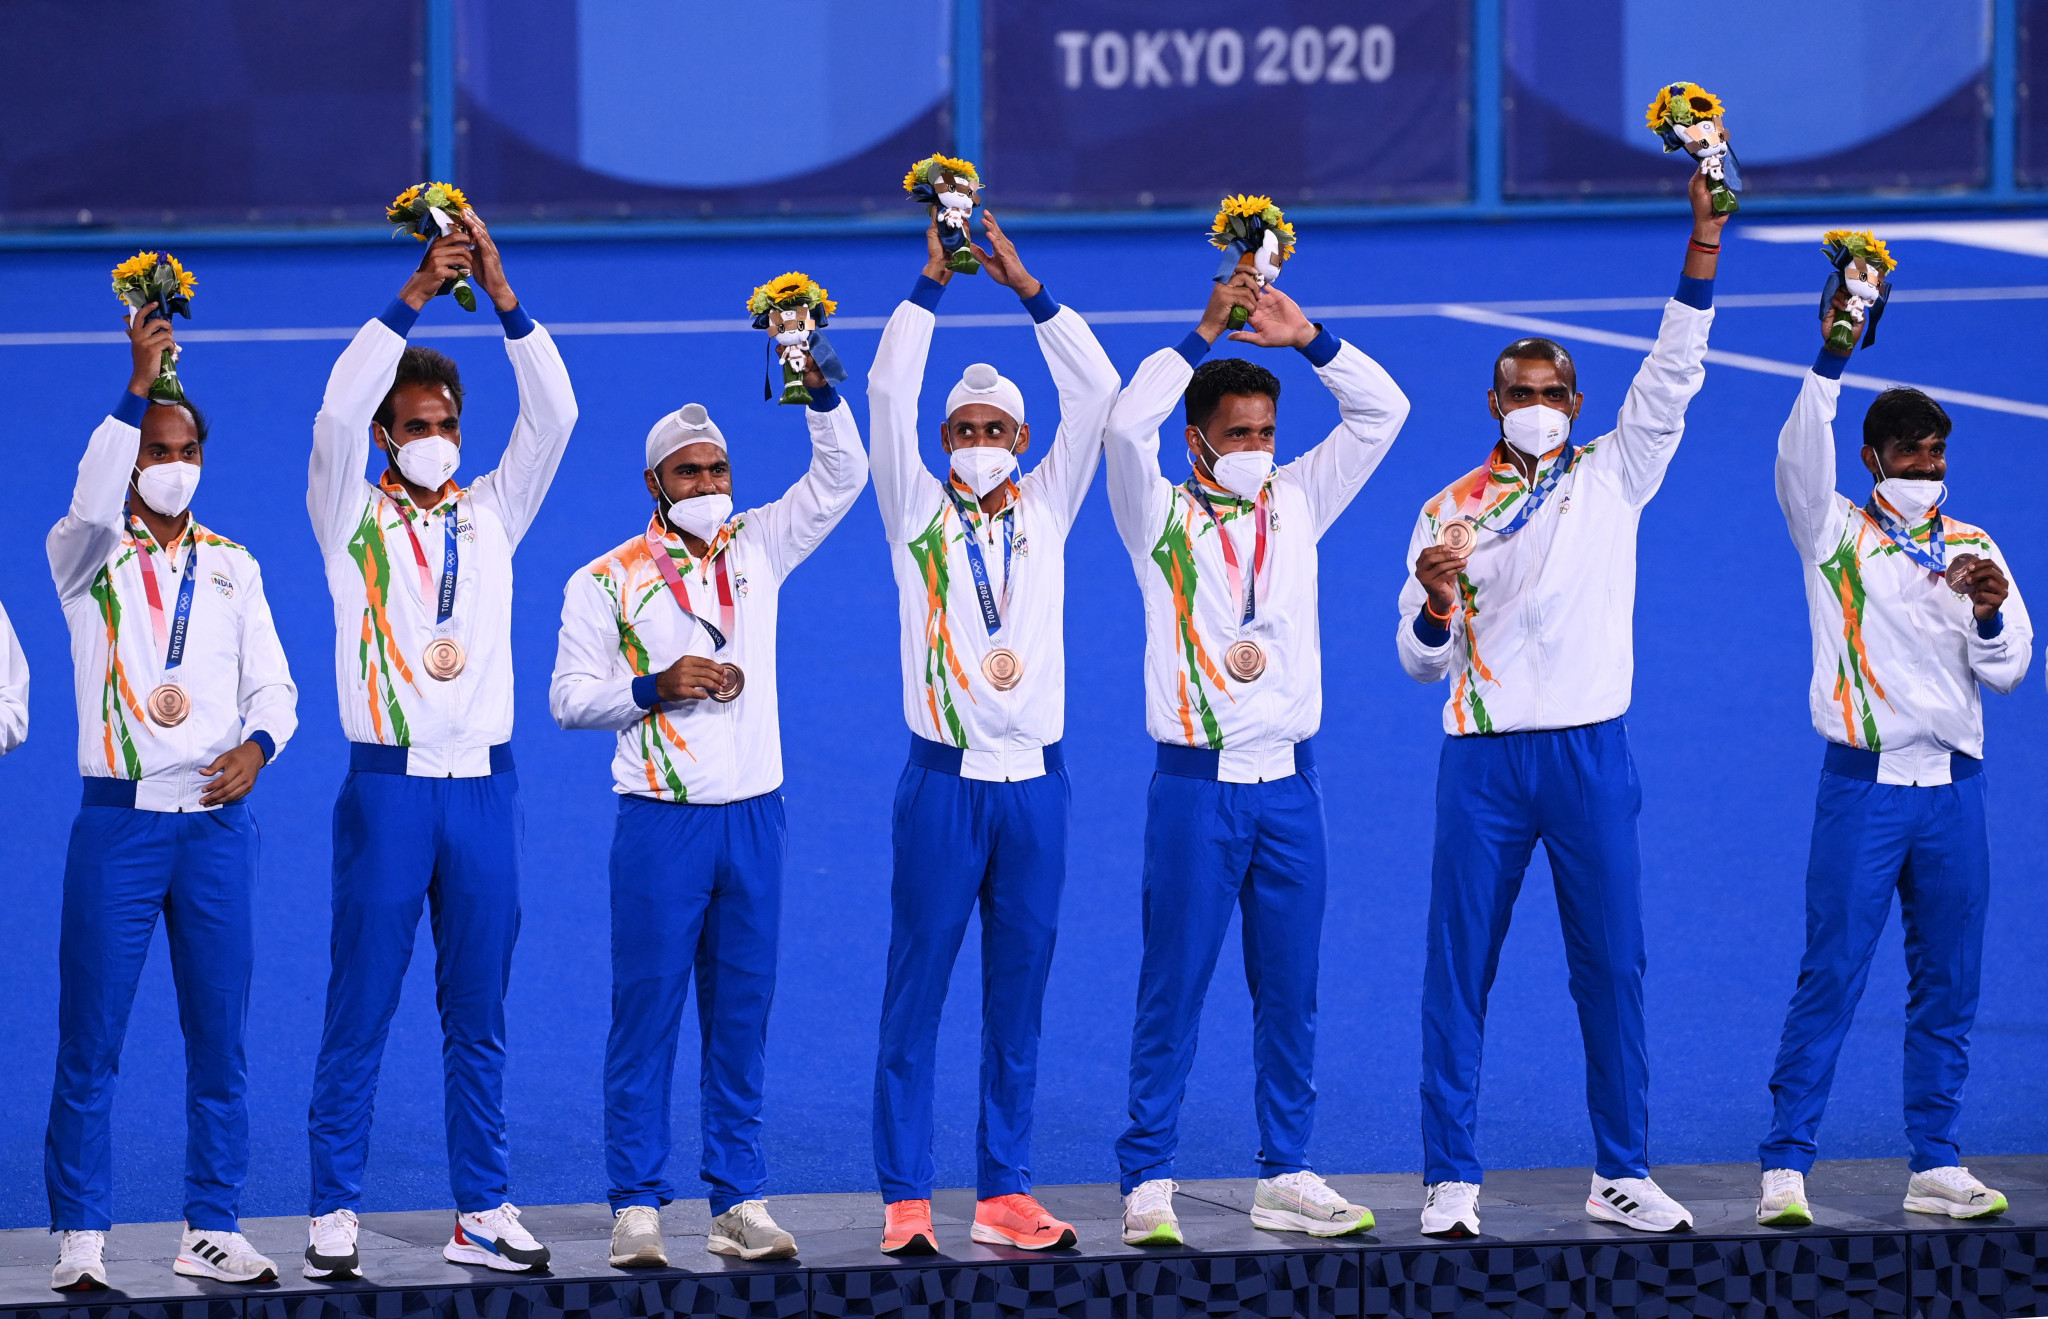 India's squad at the Men's Junior Hockey World Cup features members of the Tokyo 2020 bronze medal winning team ©Getty Images 